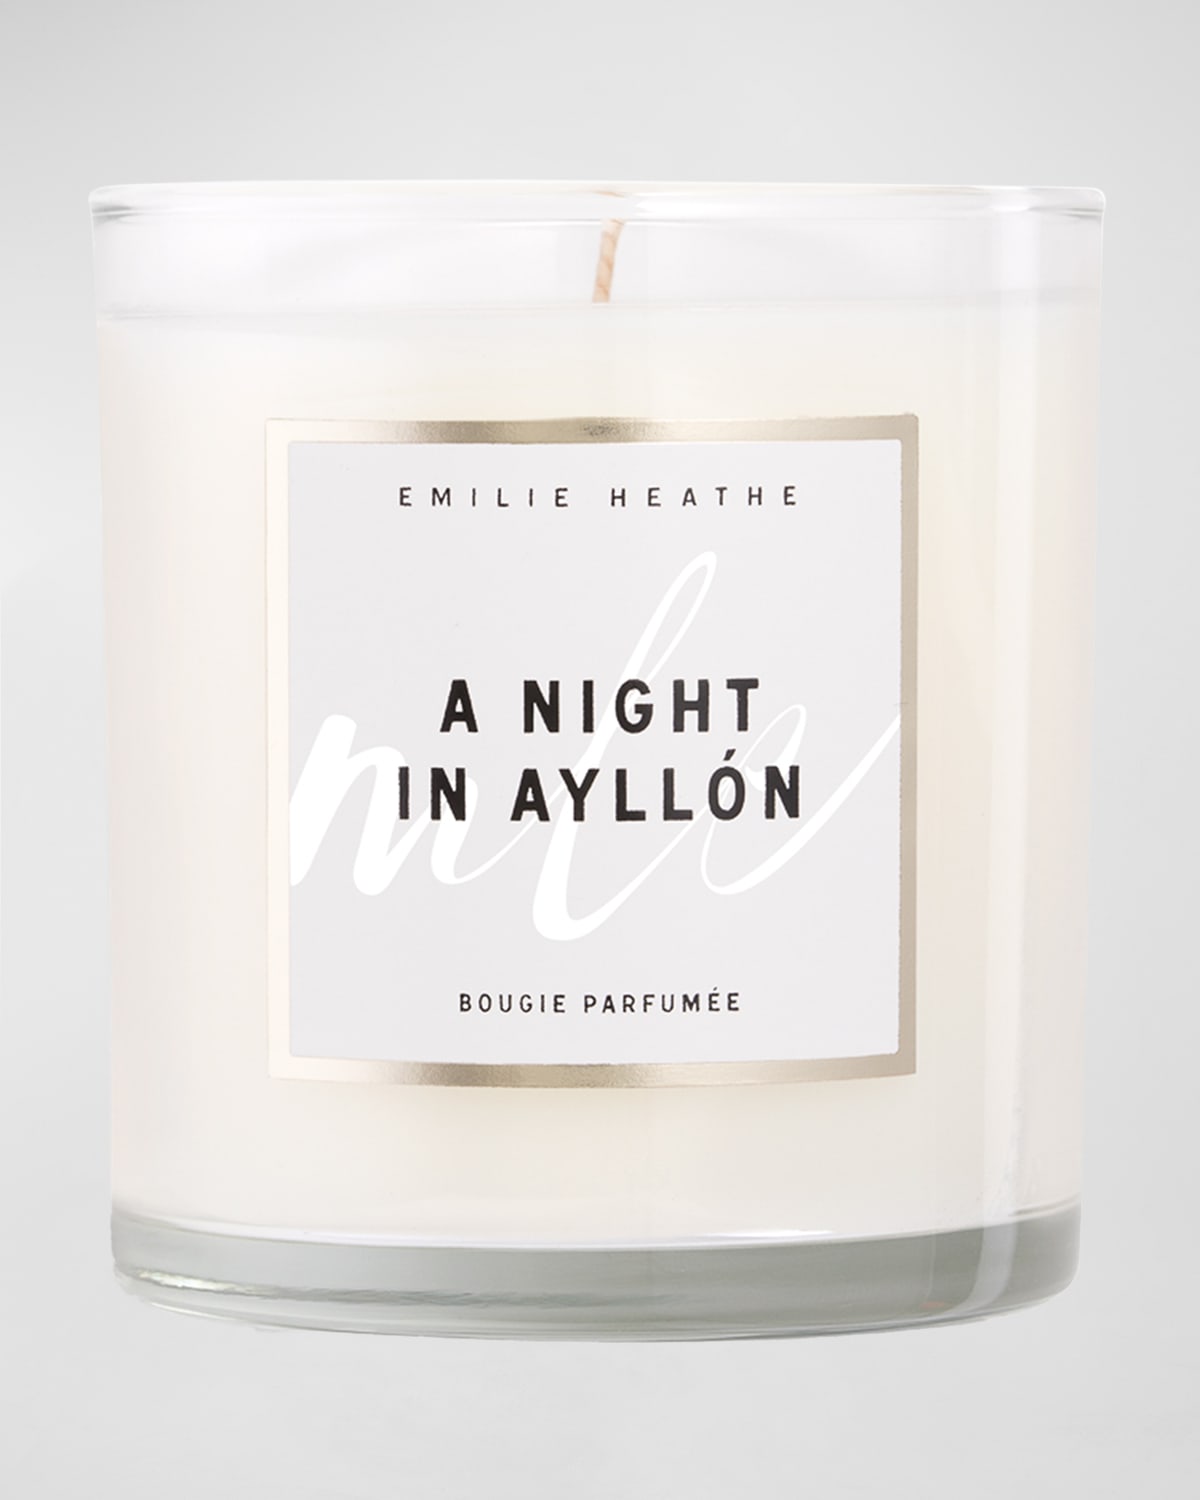 Emilie Heathe A Night In Ayllon Scented Candle